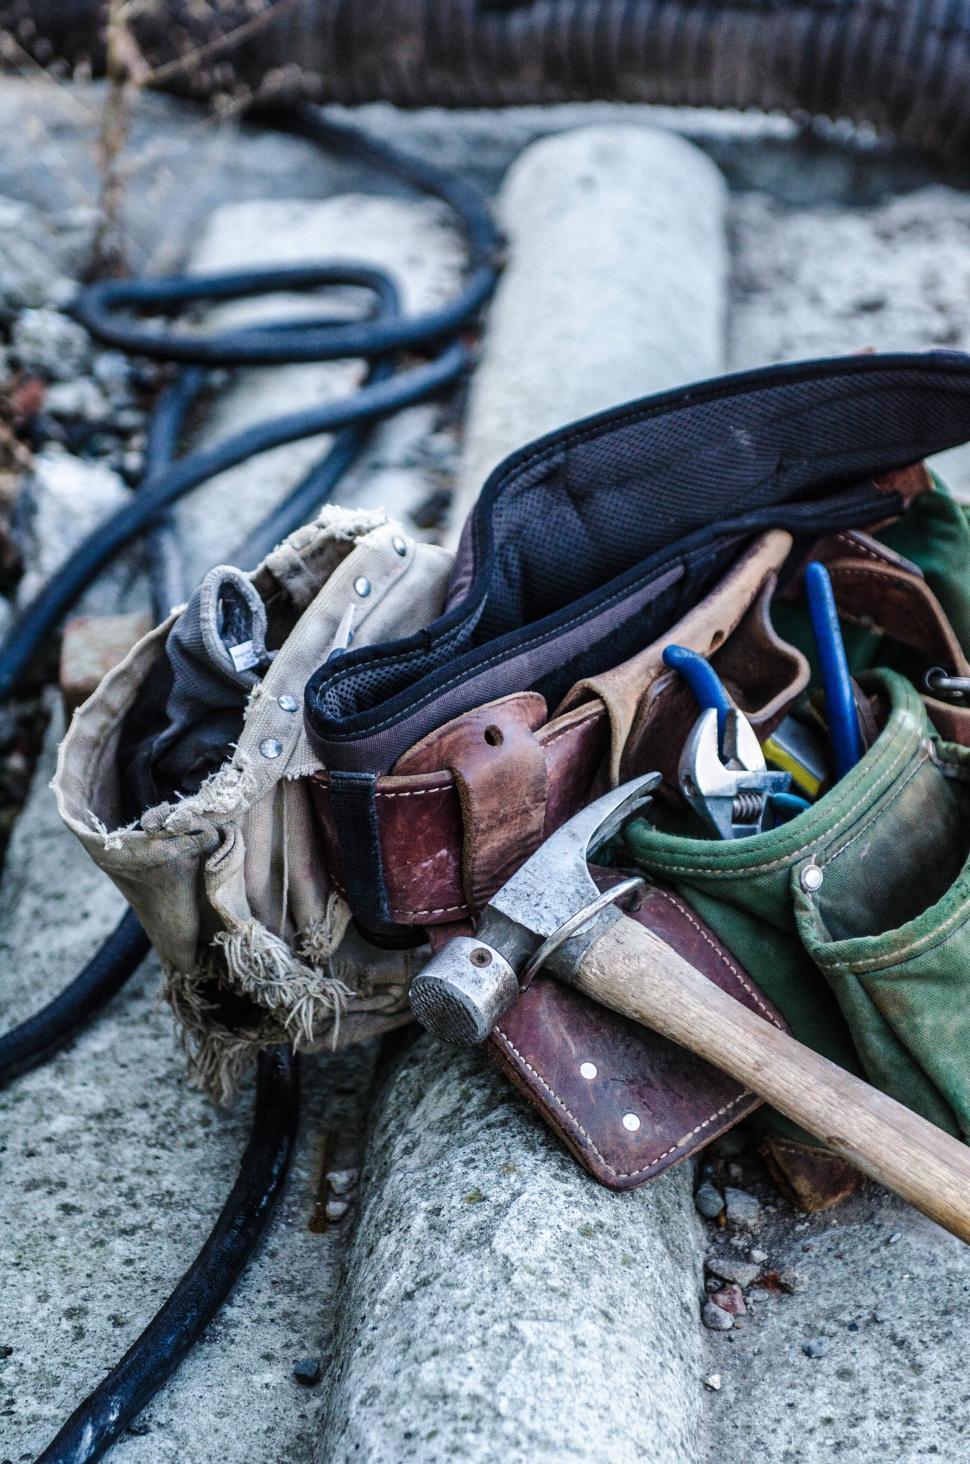 Free Image of Tool bag and equipment on concrete ground 